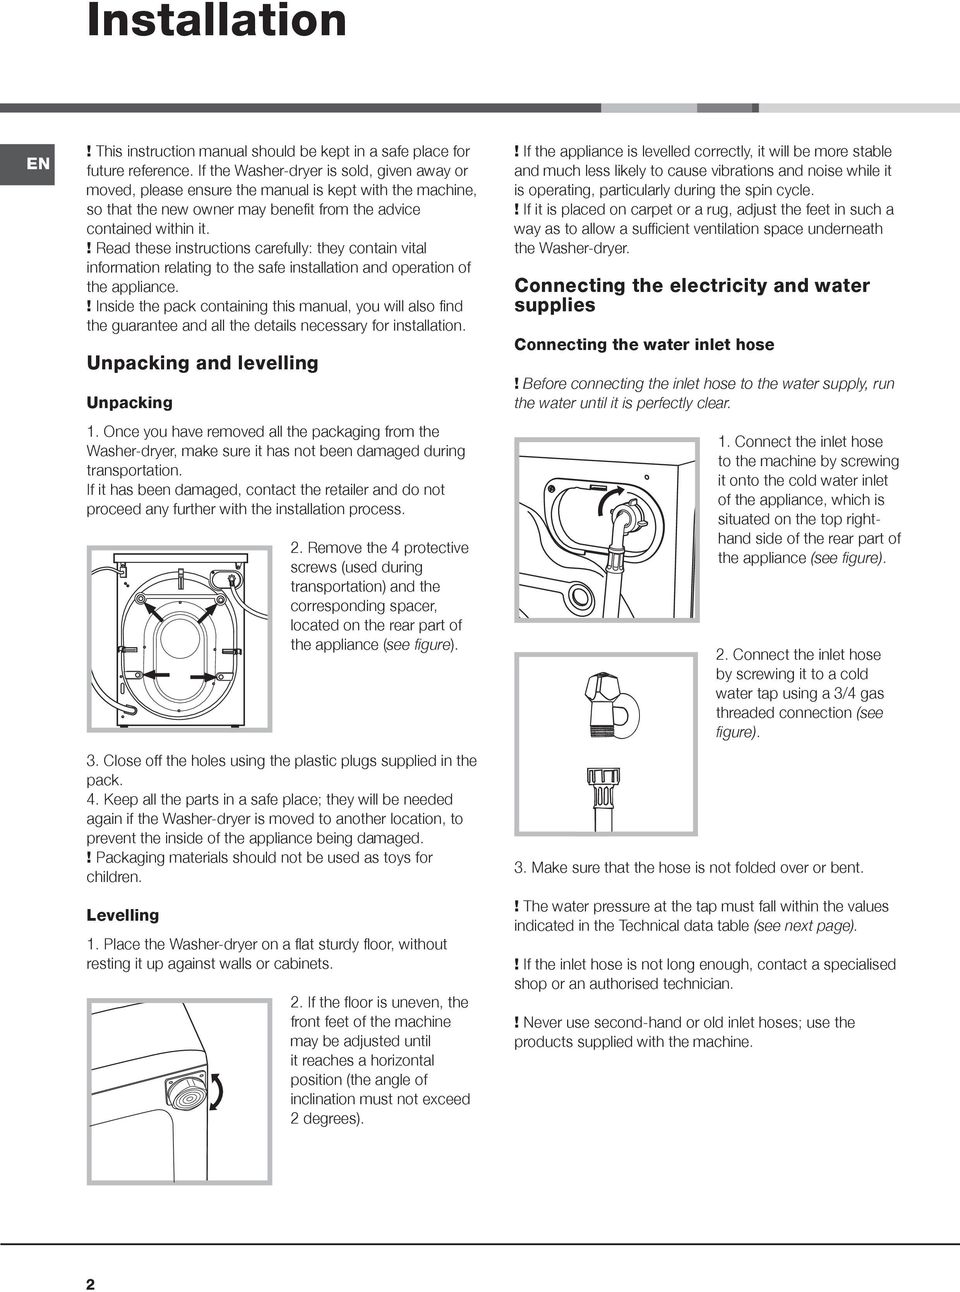 ! Read these instructions carefully: they contain vital information relating to the safe installation and operation of the appliance.